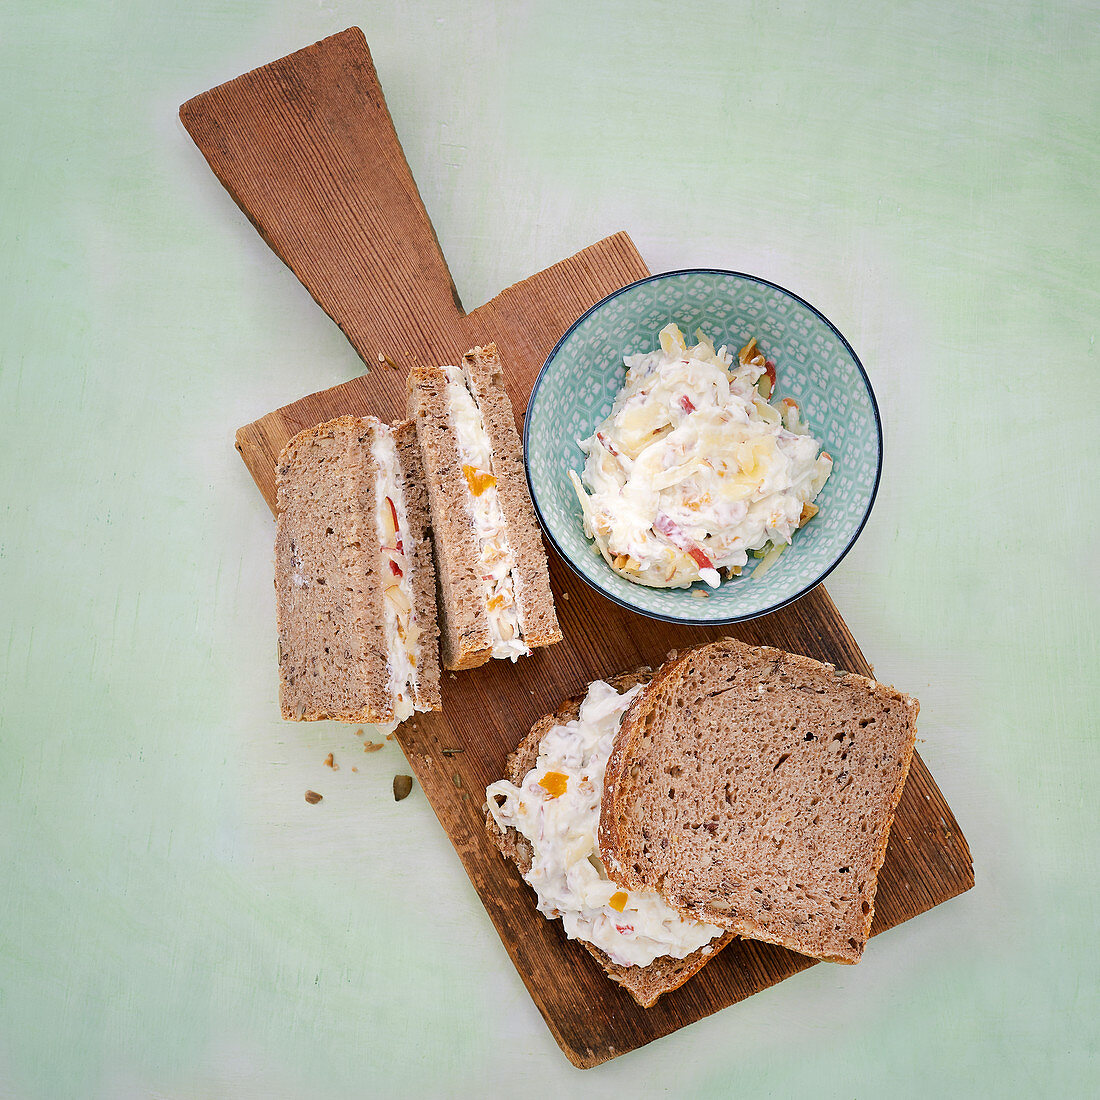 Wholemeal bread with apricot and walnut quark